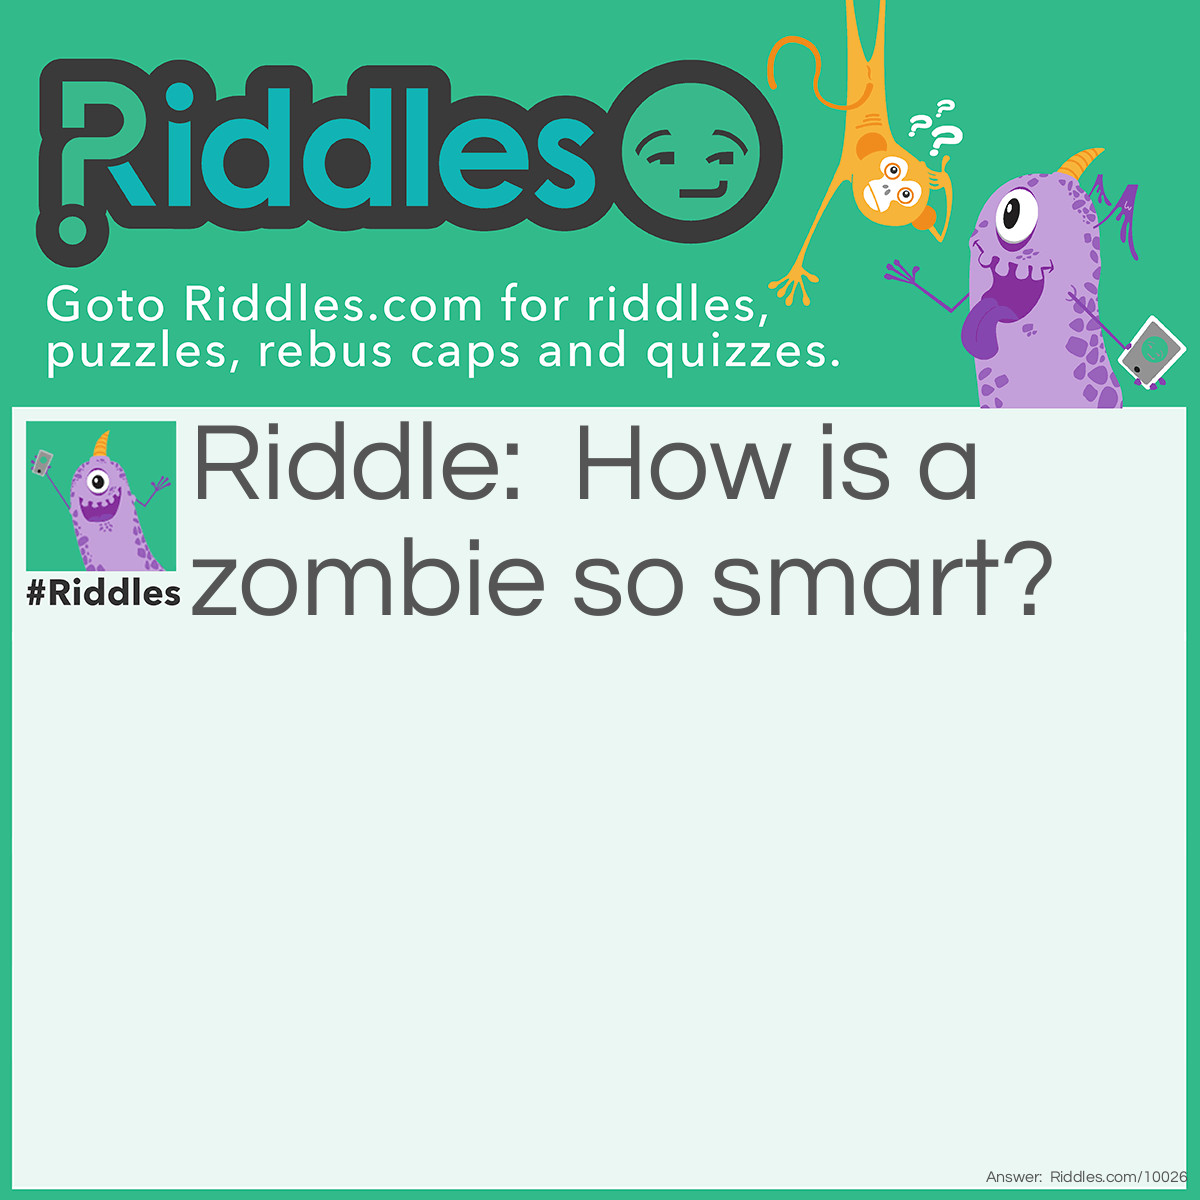 Riddle: How is a zombie so smart? Answer: It's got the brains!